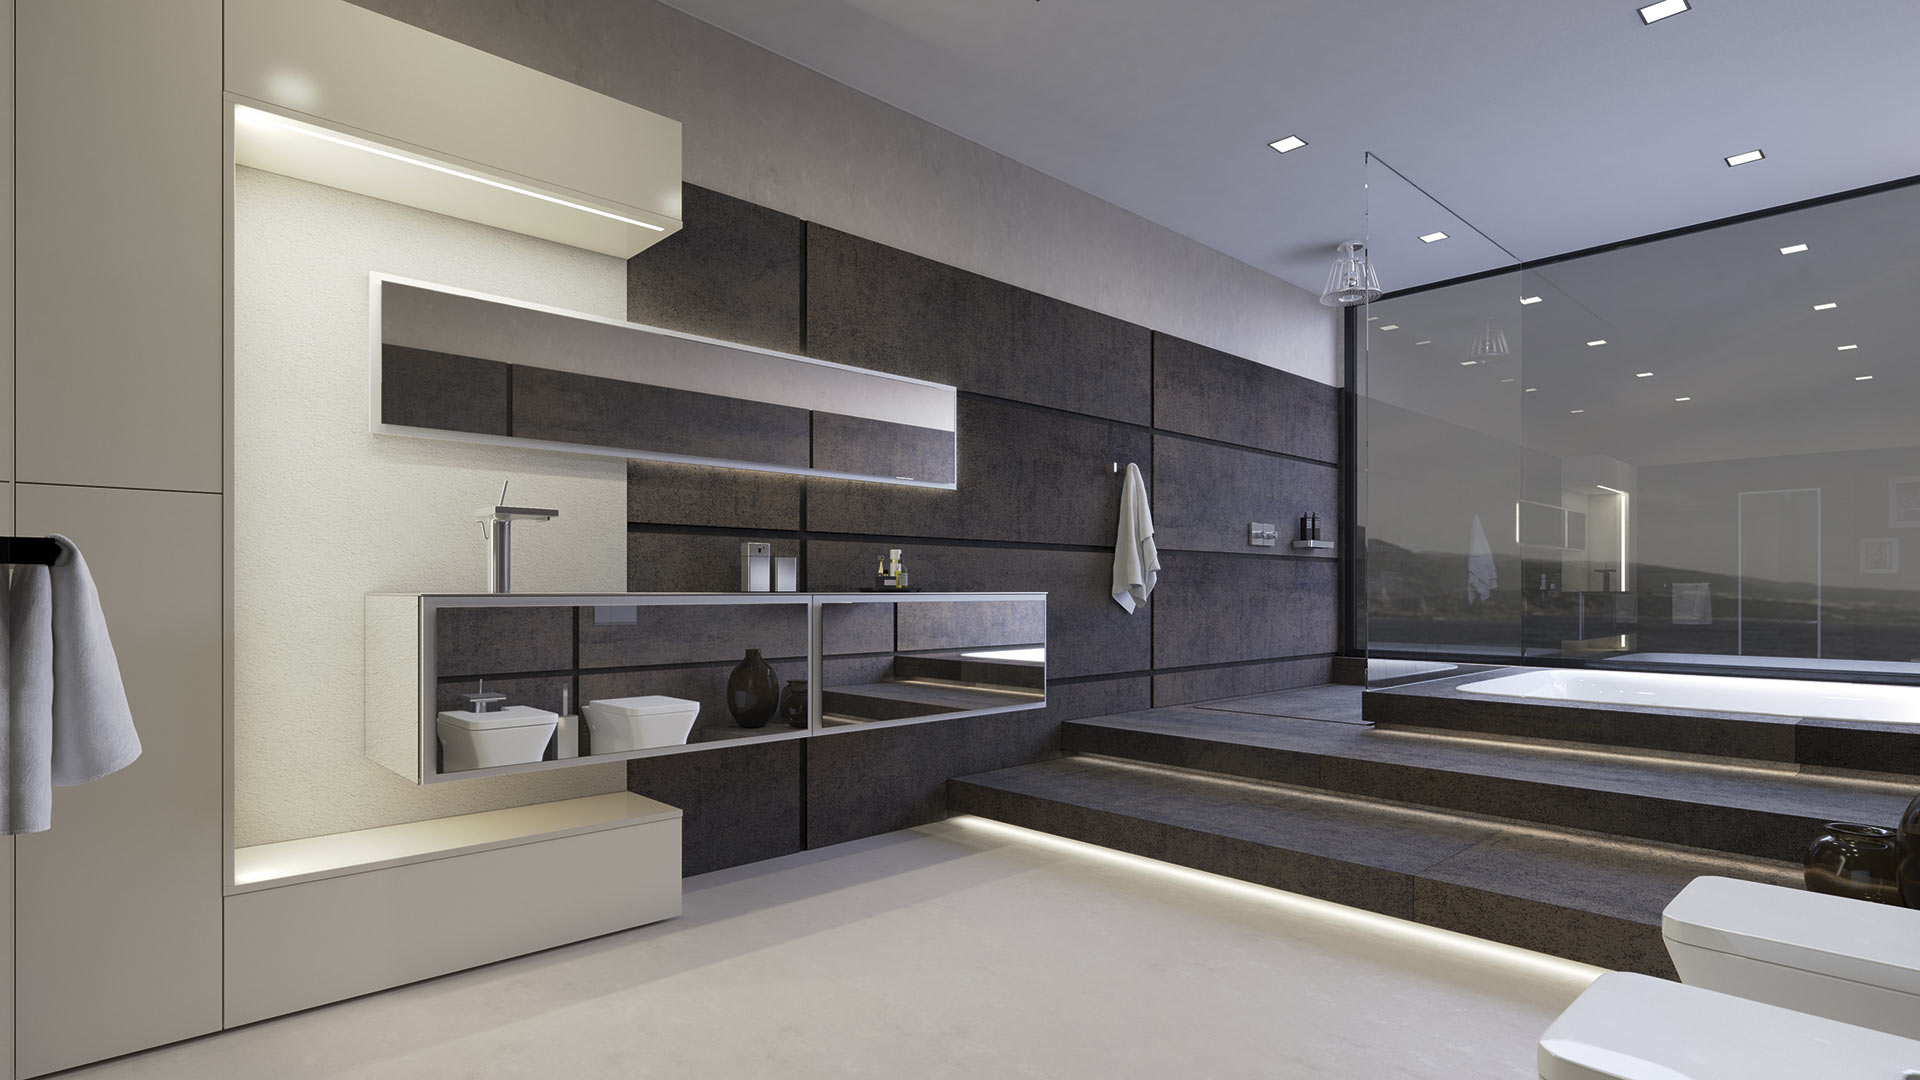 Originality with lines and combination of different materials to create a unique bathroom